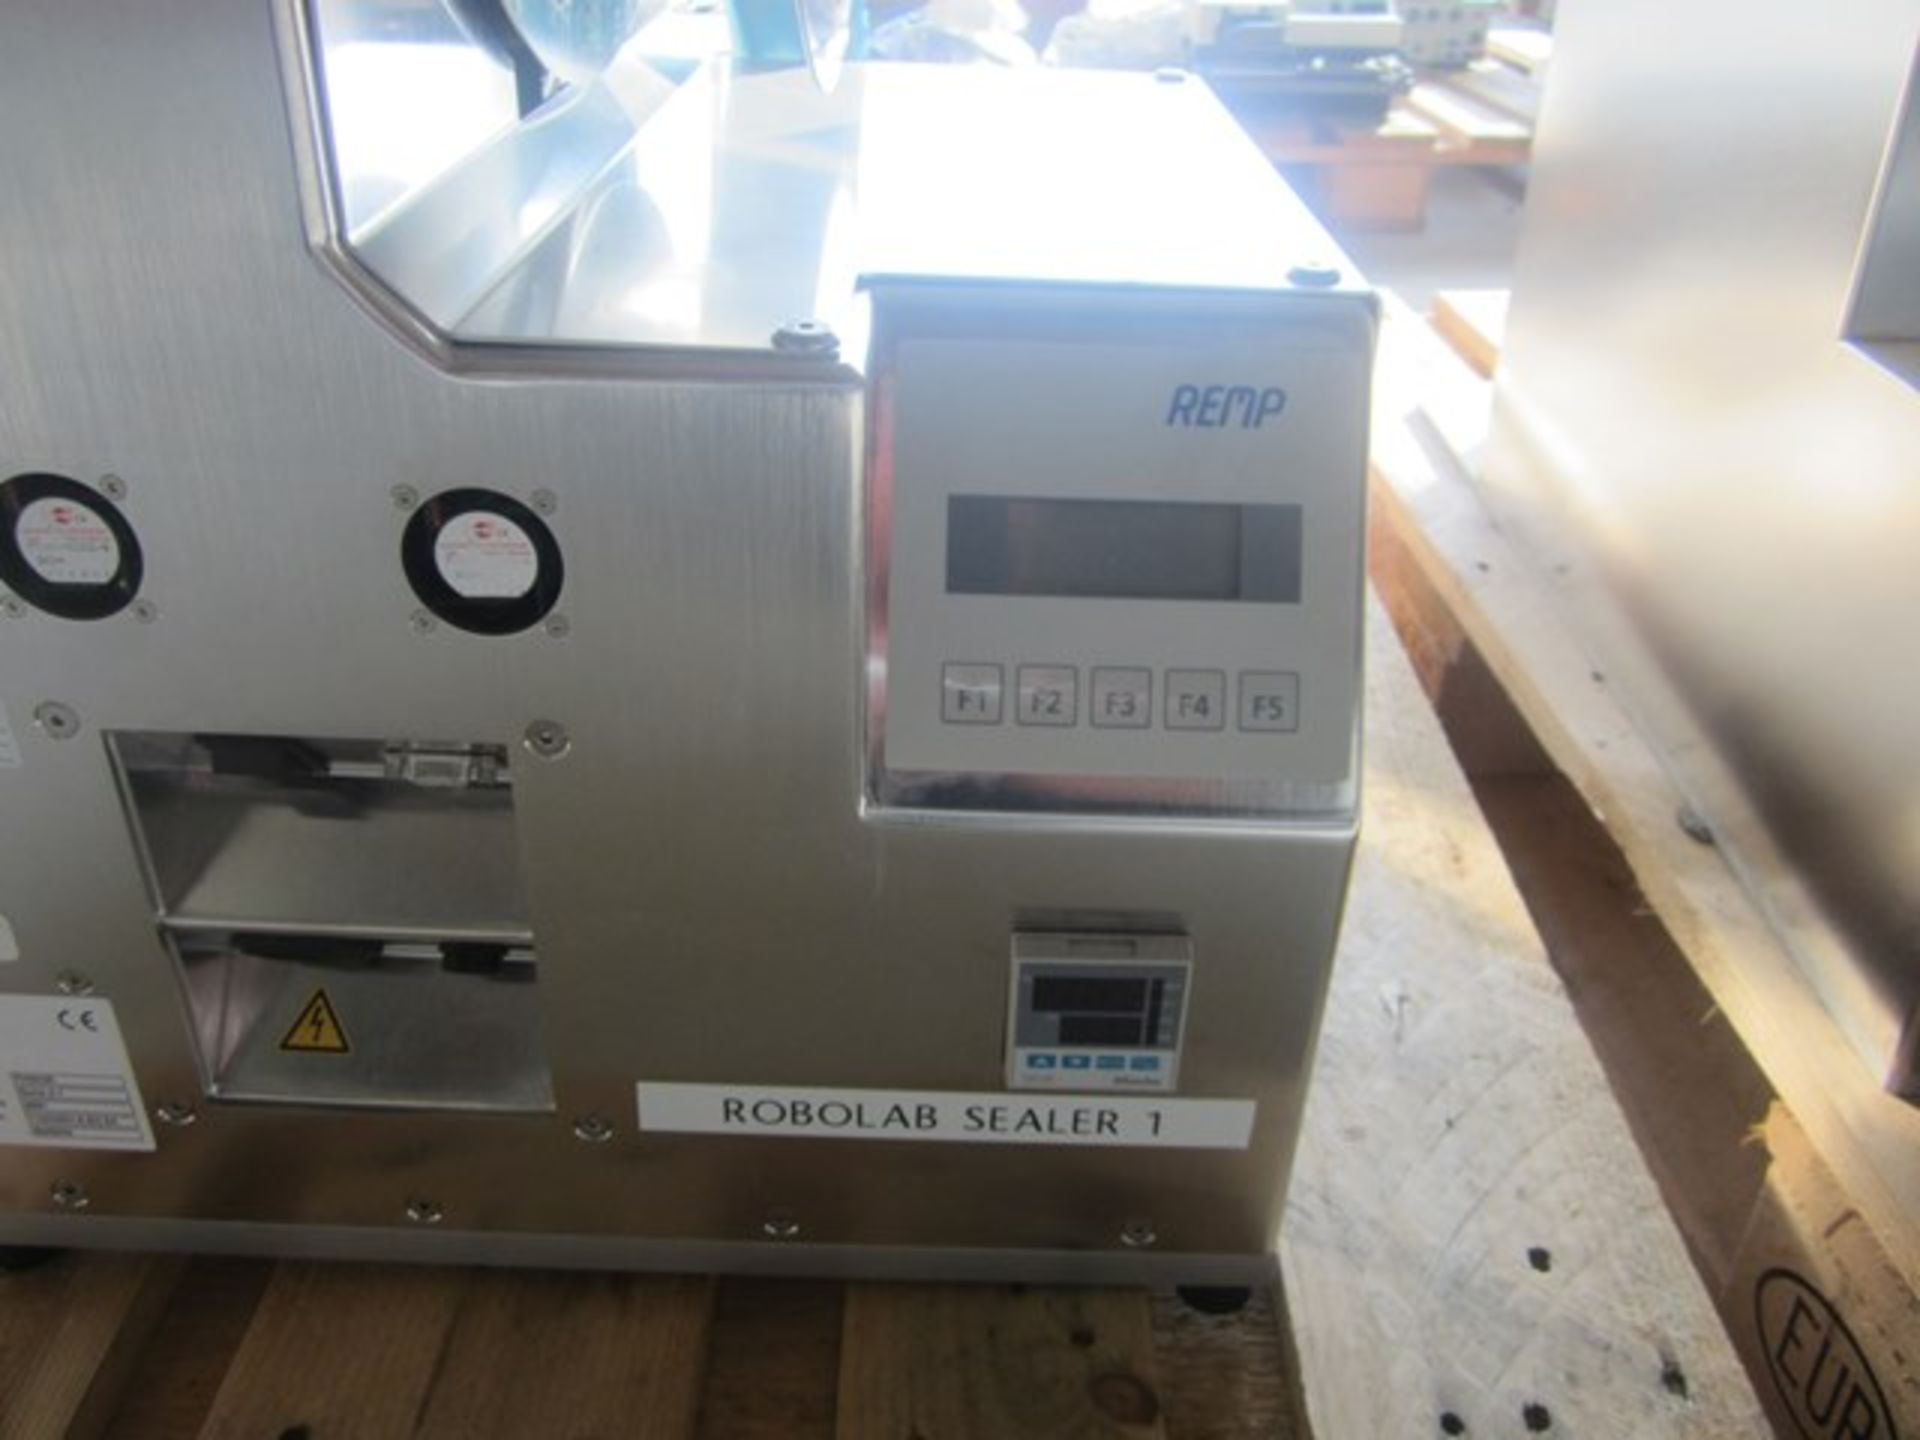 REMP PHS038 robotic plate sealer (2001) (height 800mm x width 500mm x depth 500mm) - Image 2 of 3